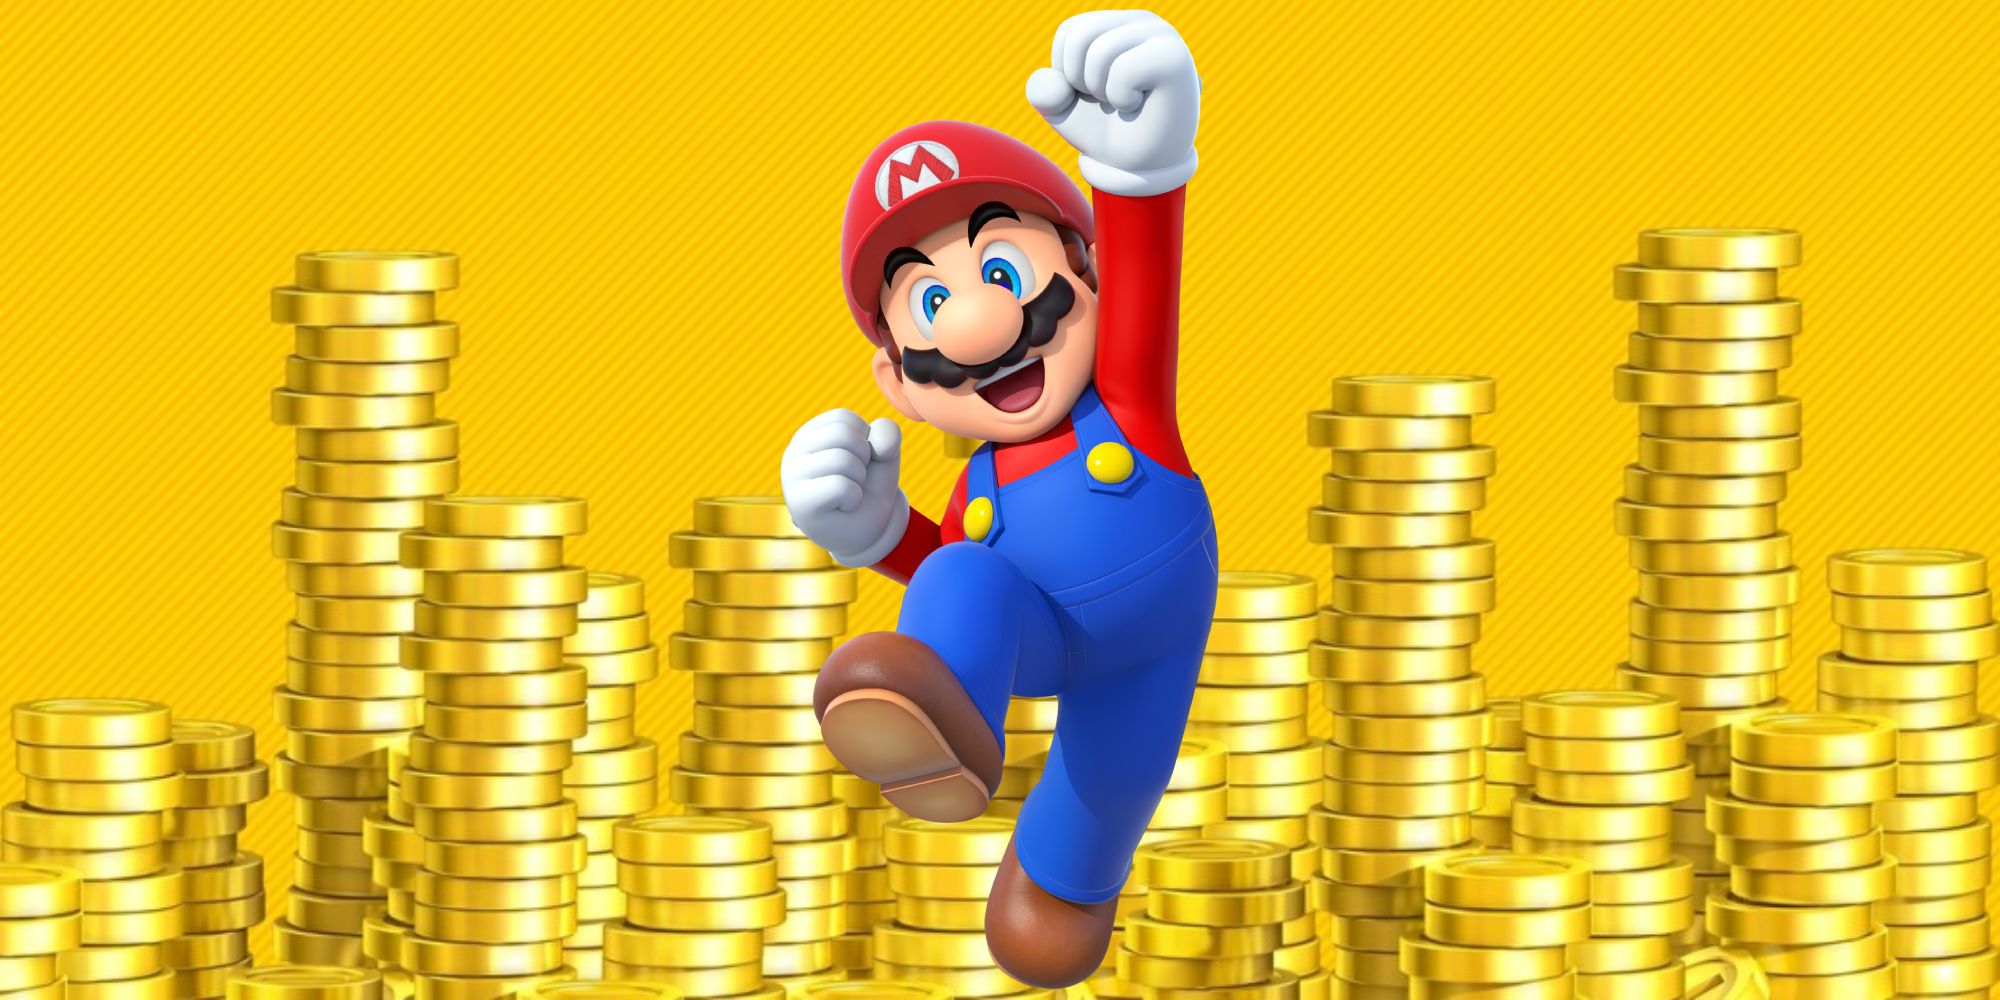 Fictional Currencies a wide shot of Mario jumping in the air with his fist raised in front of piles of golden coins